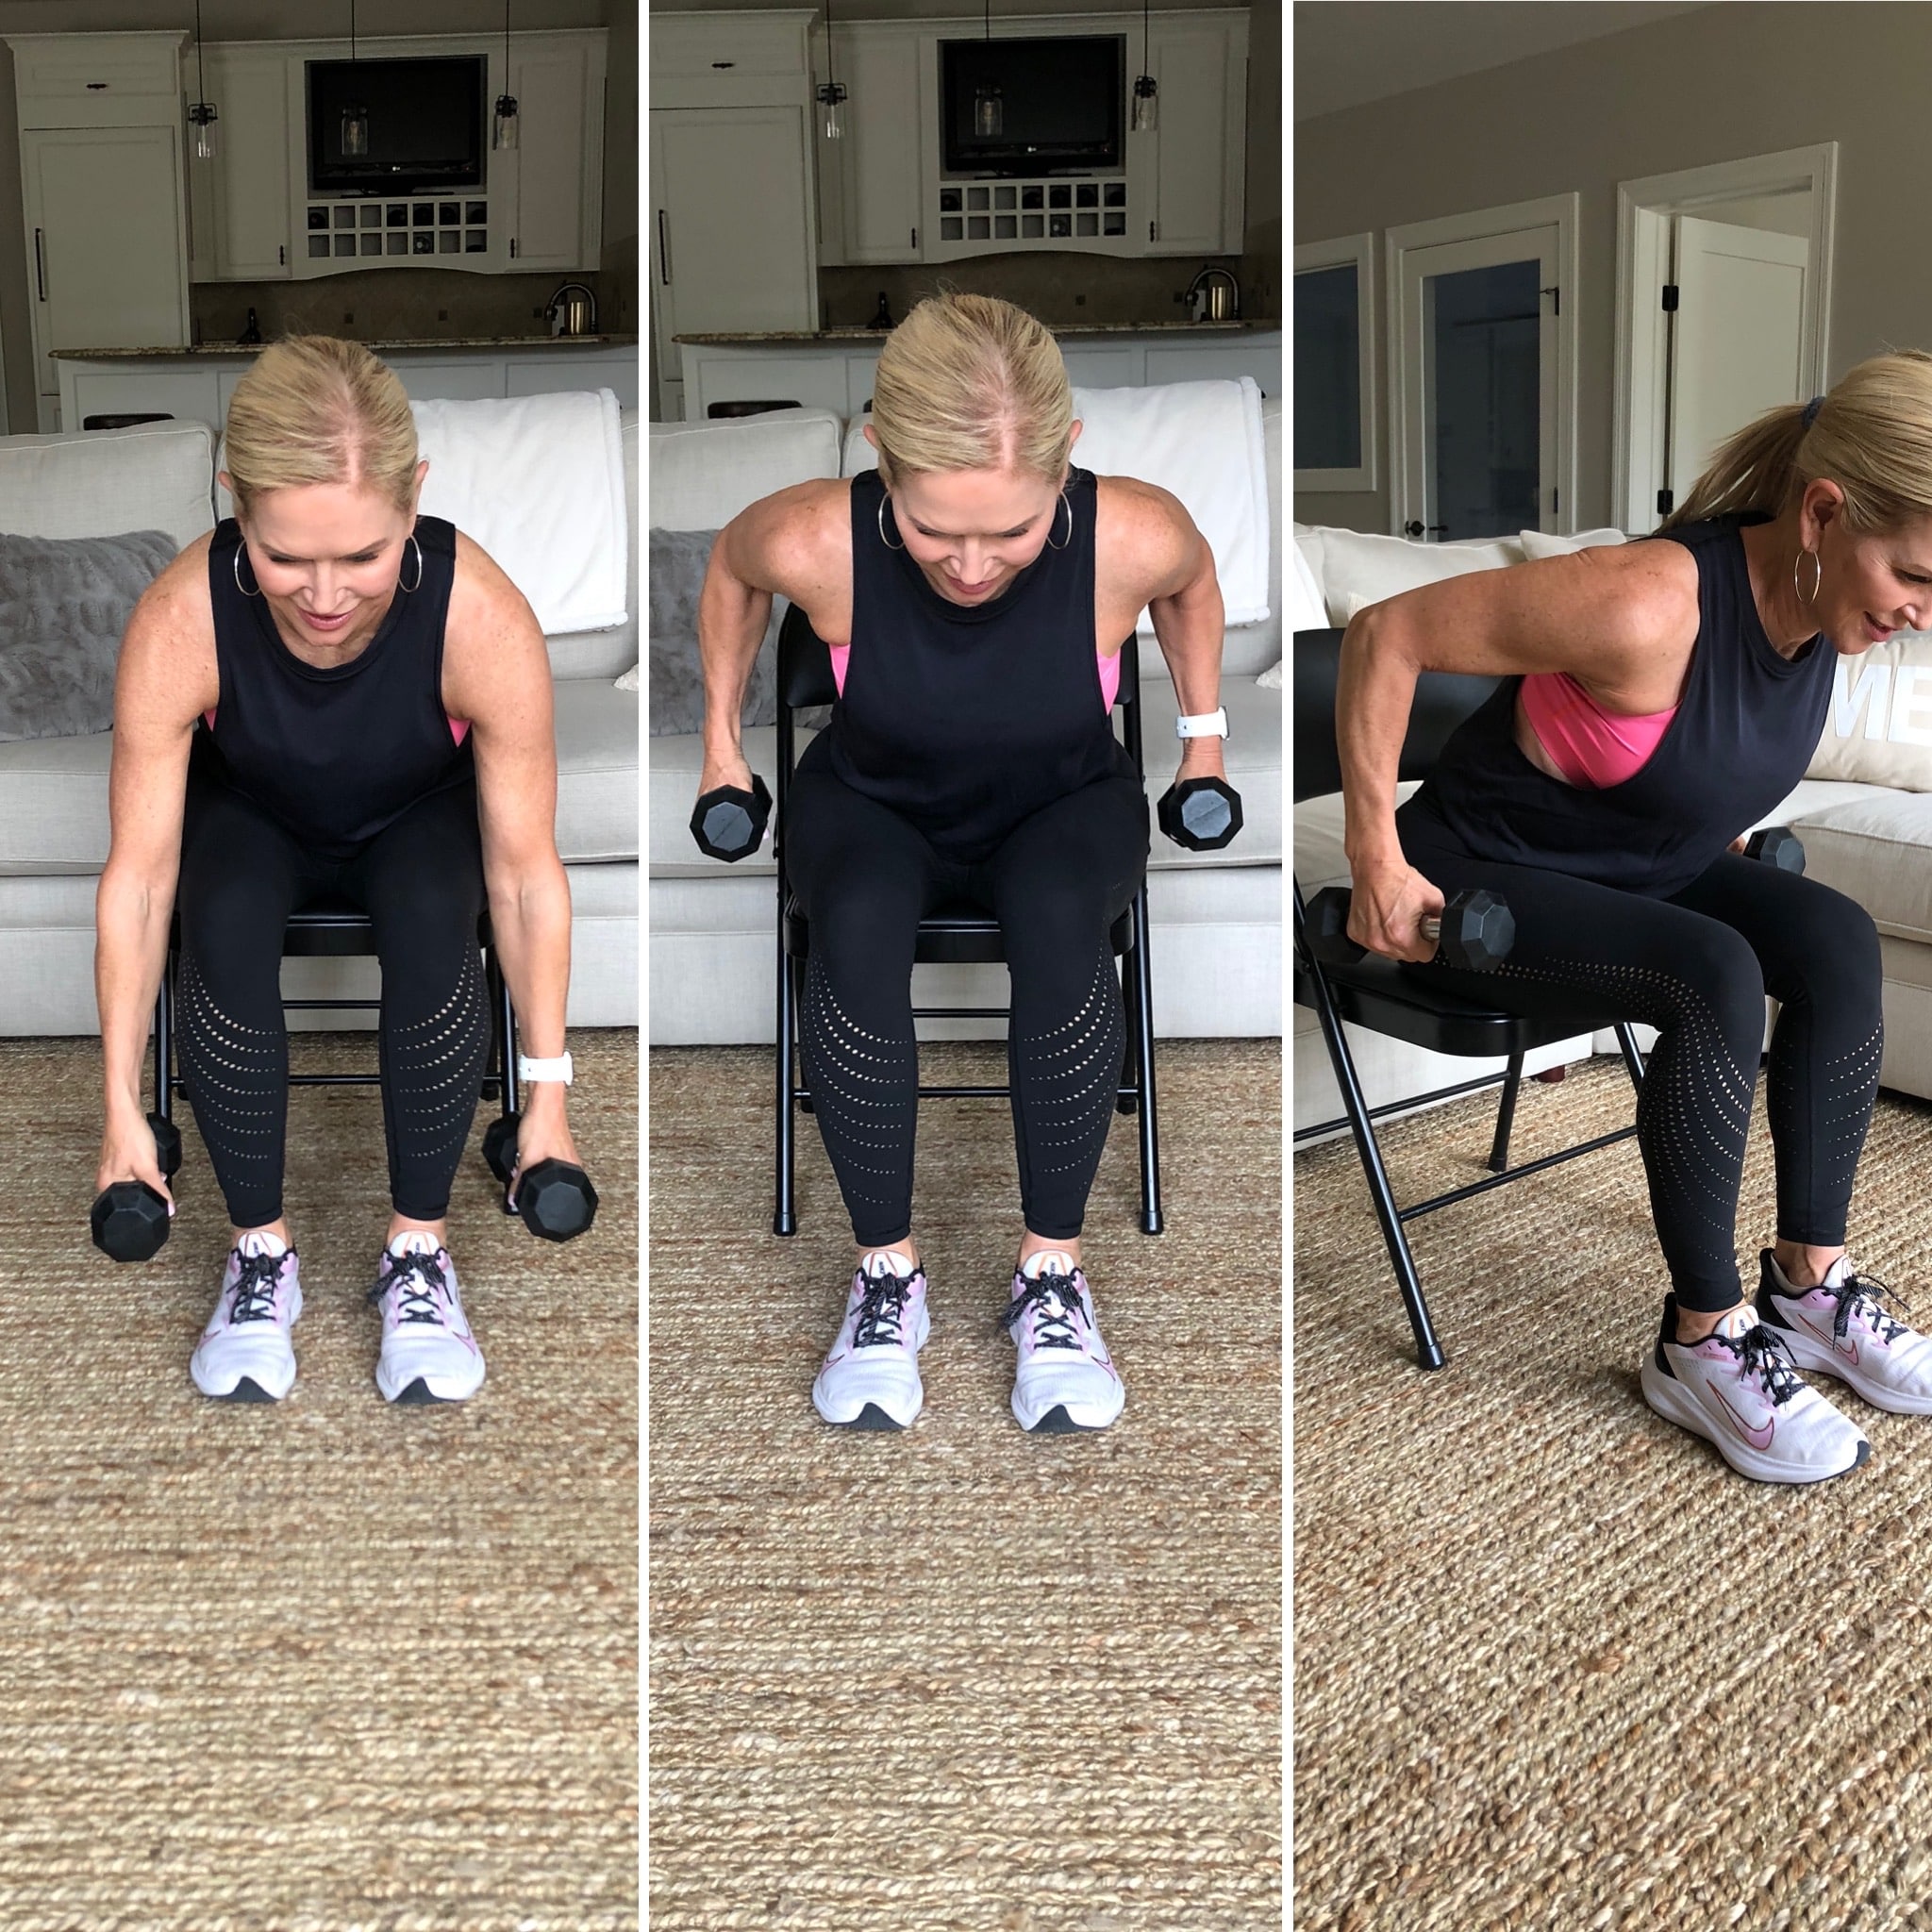 Chris Freytag performing a seated bent over row on a black folding chair, showing 3 different angles of the seated bent over row.